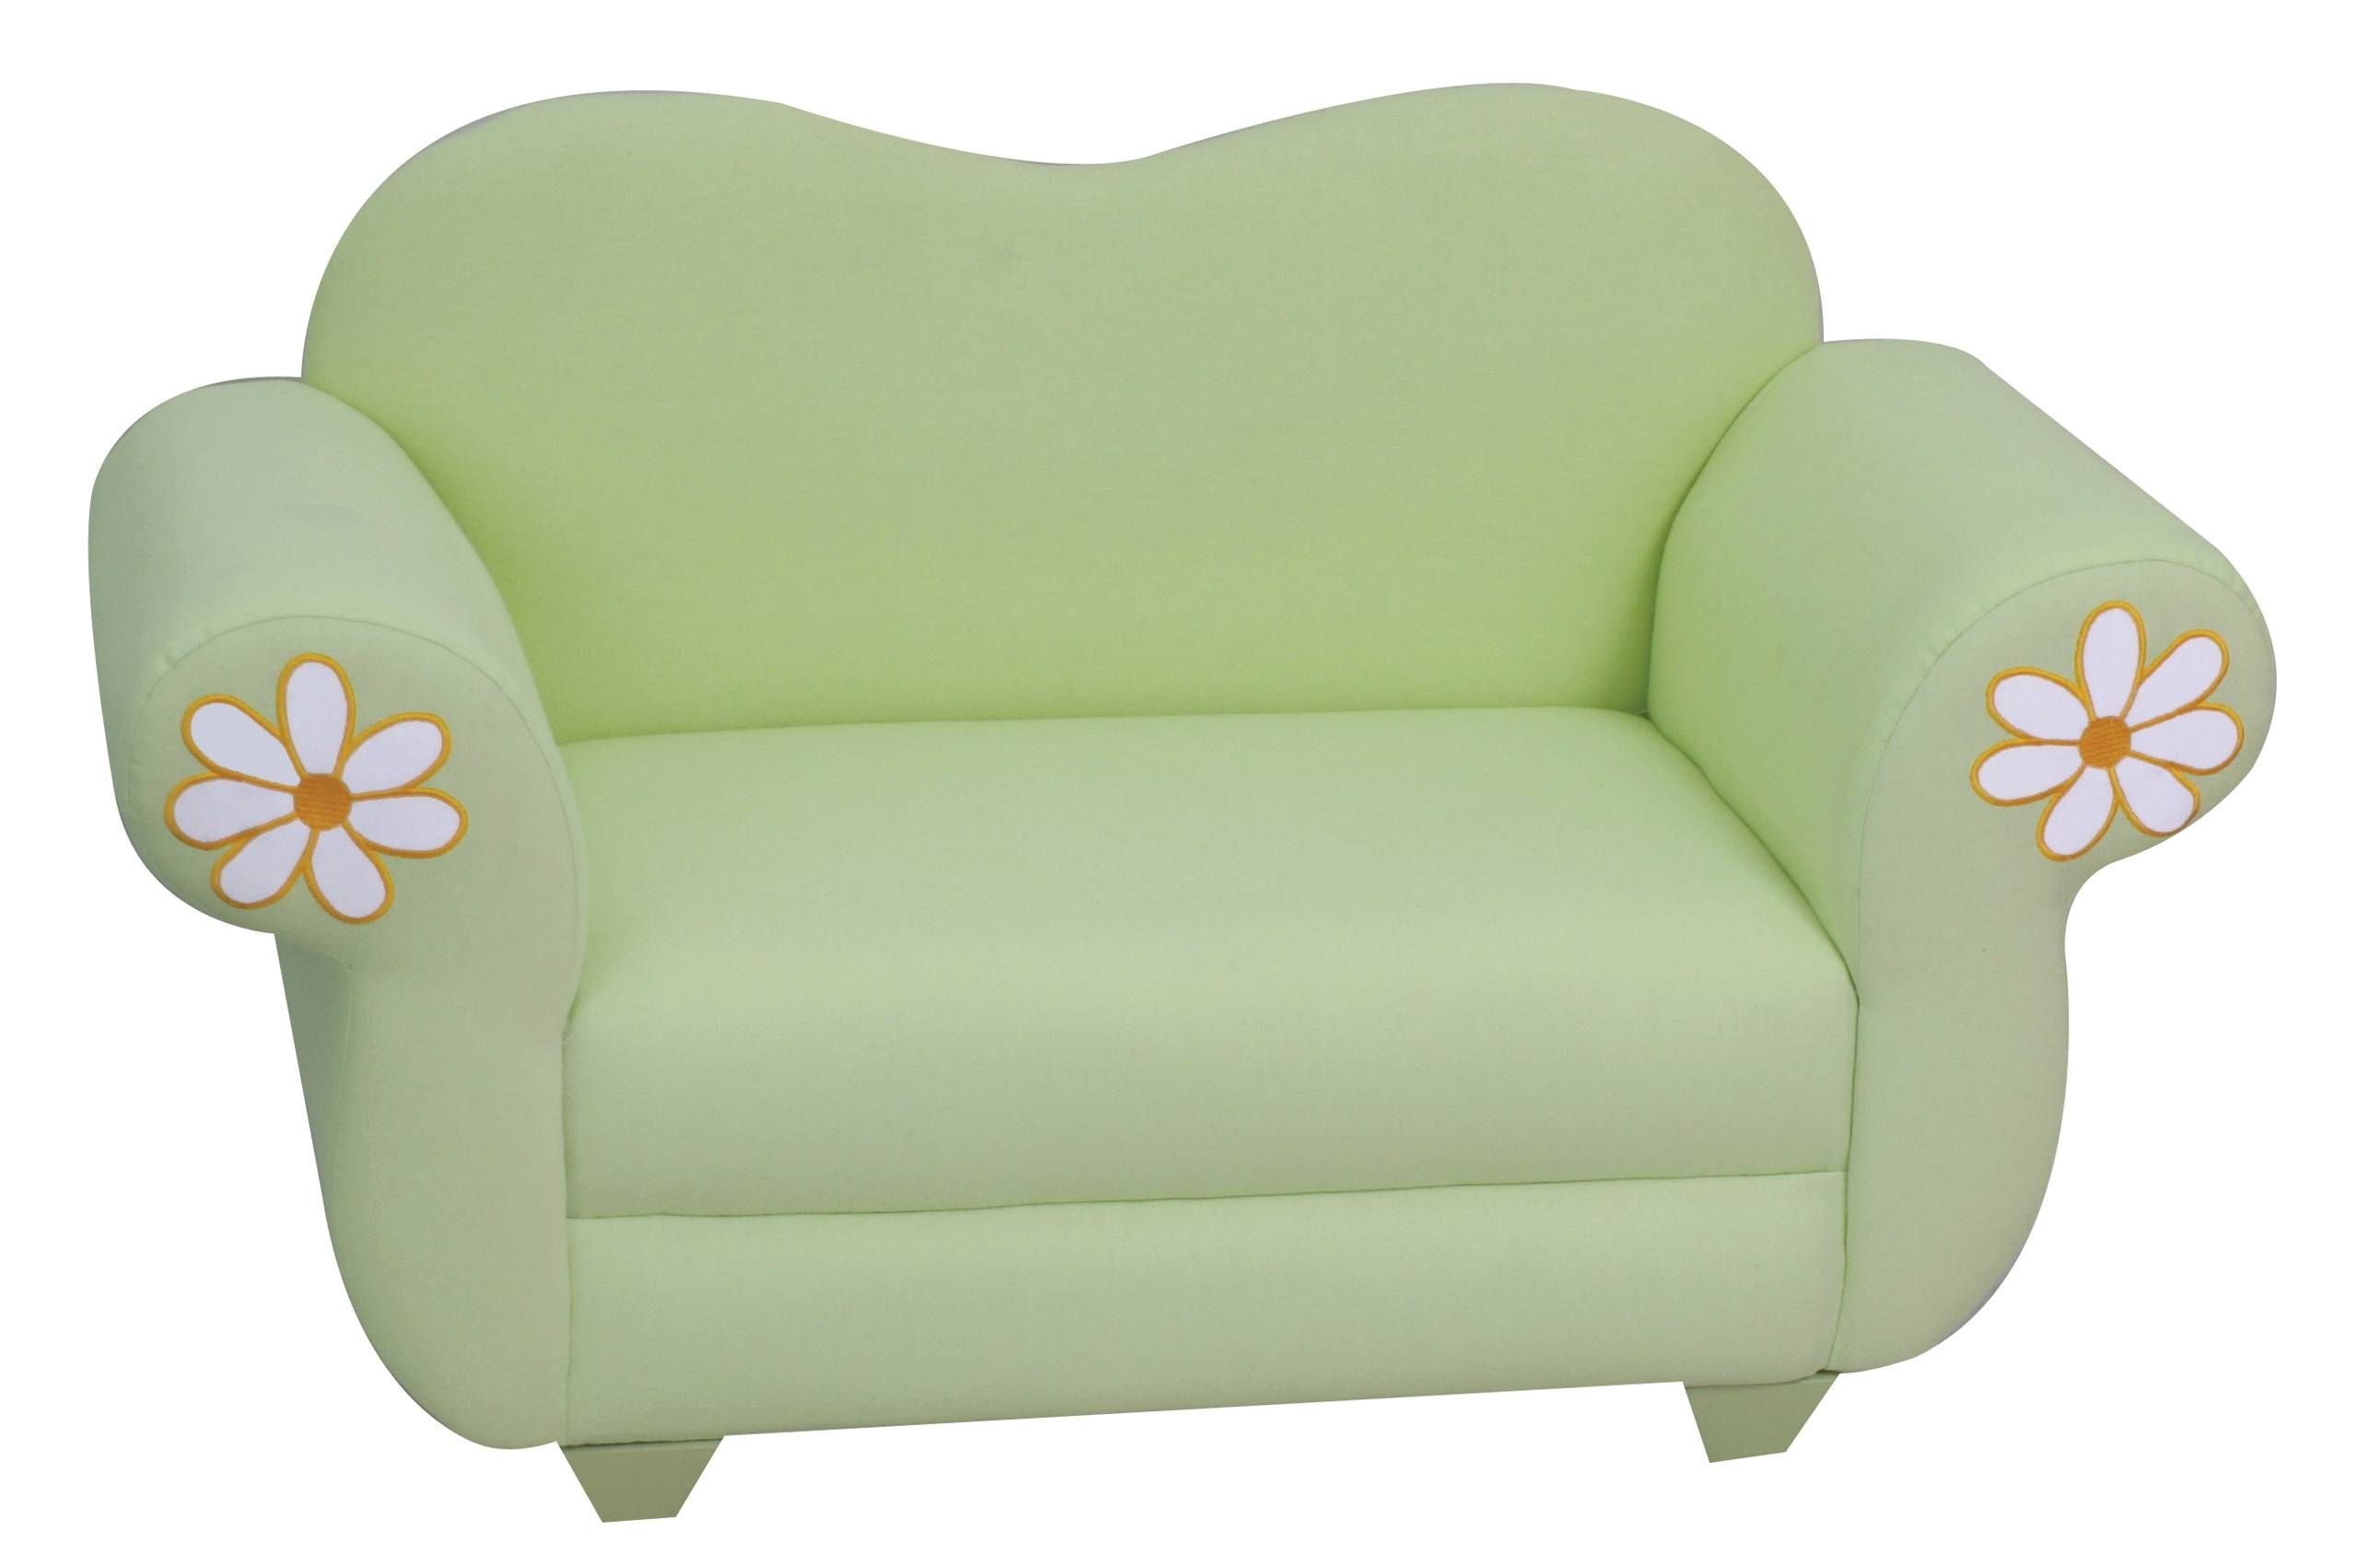 Homely Design Sofa Chairs Fantastic Sofas And Chairs 1496 Intended For Sofa With Chairs (View 6 of 15)